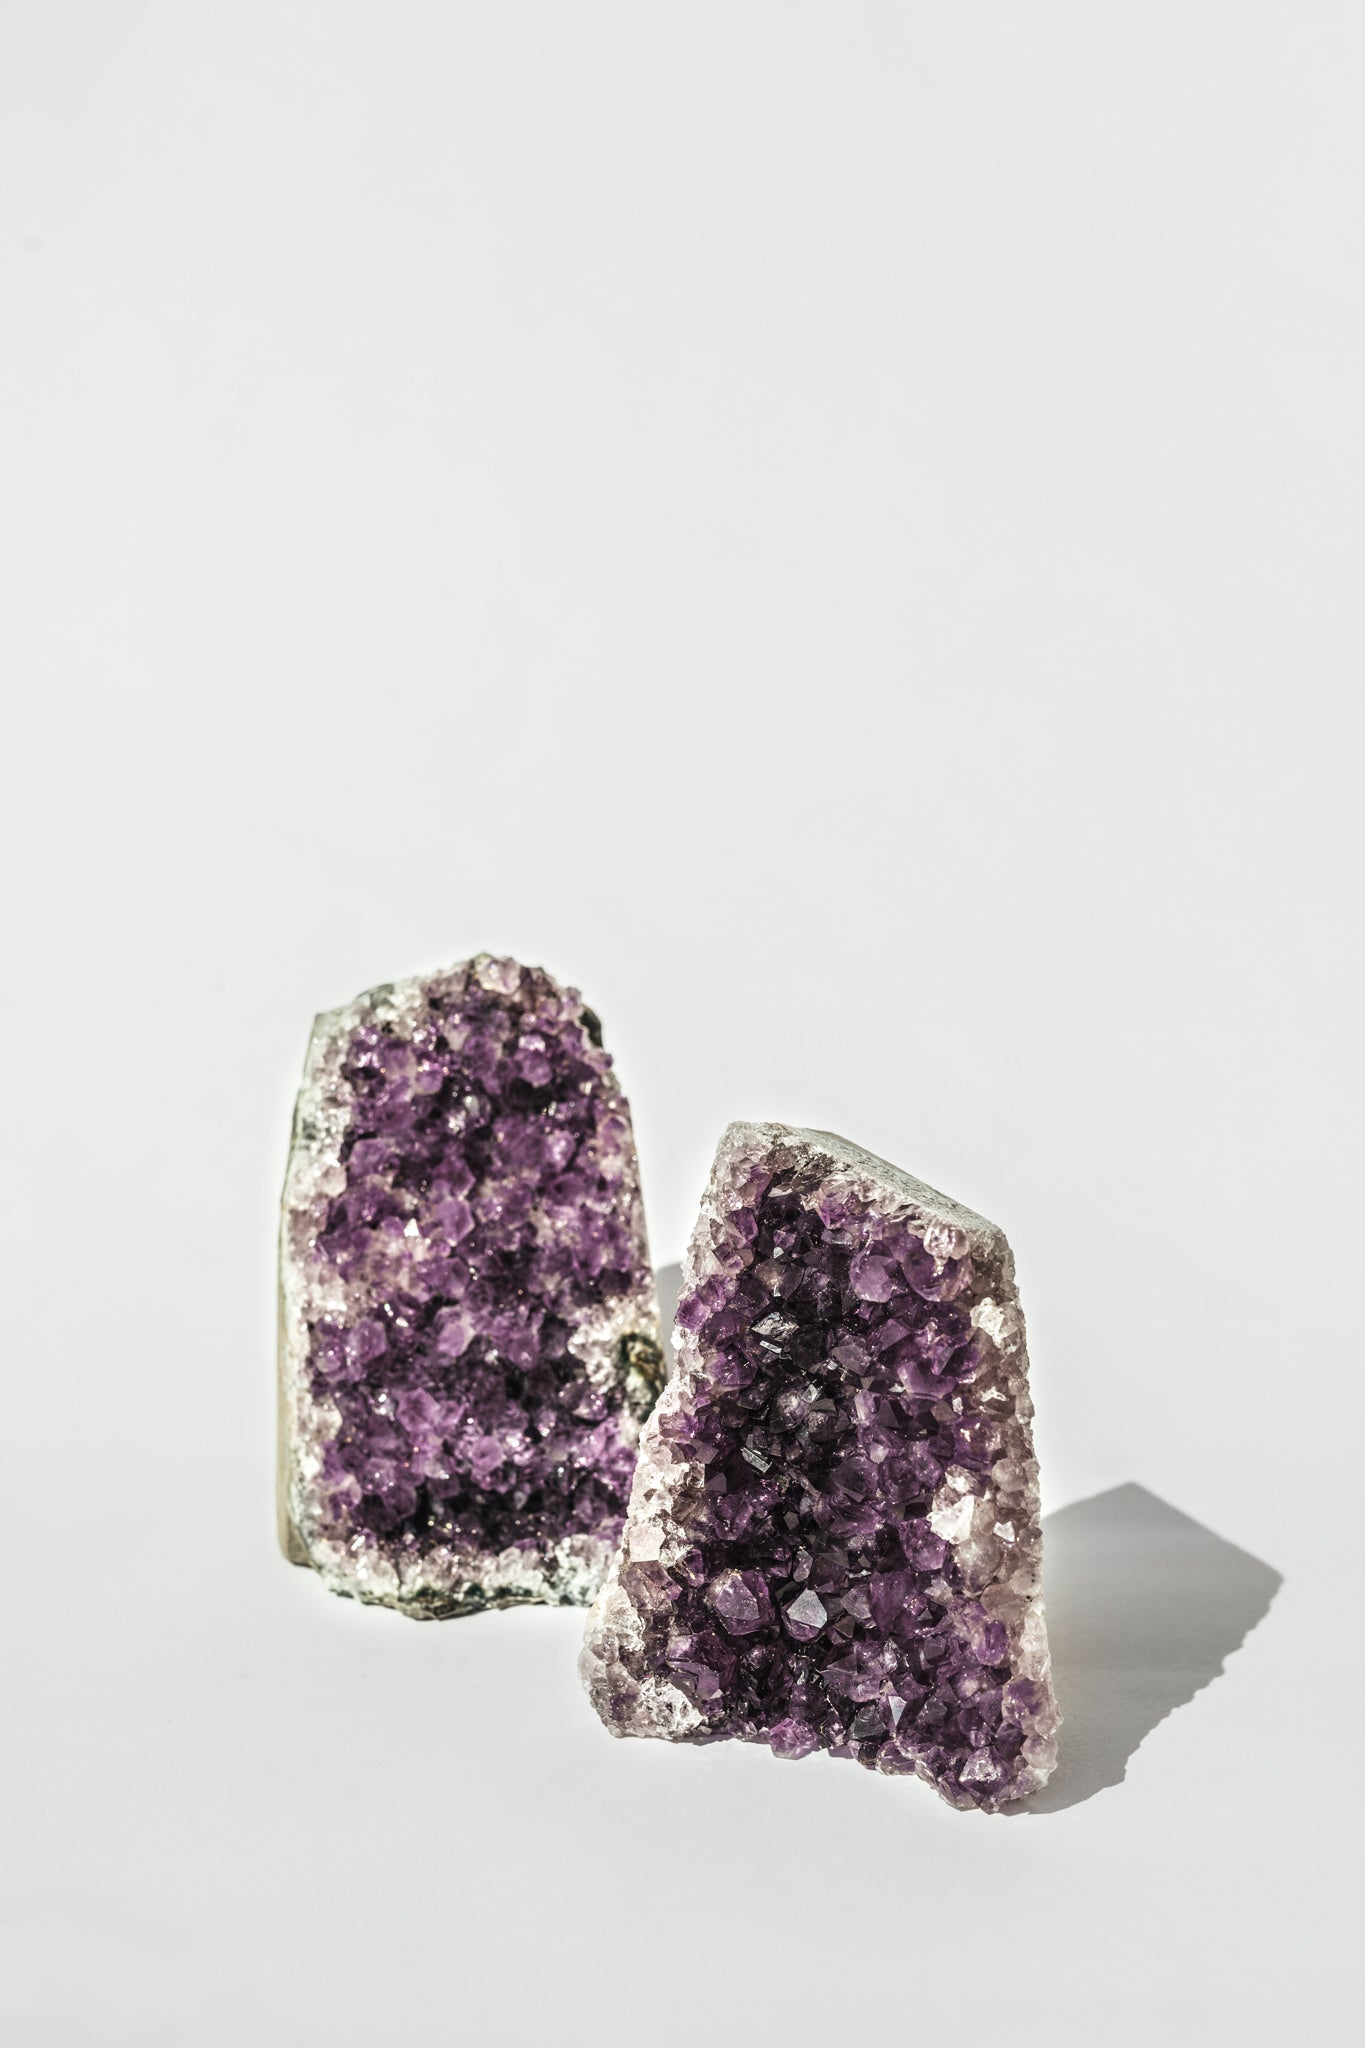 Amethyst druse with base